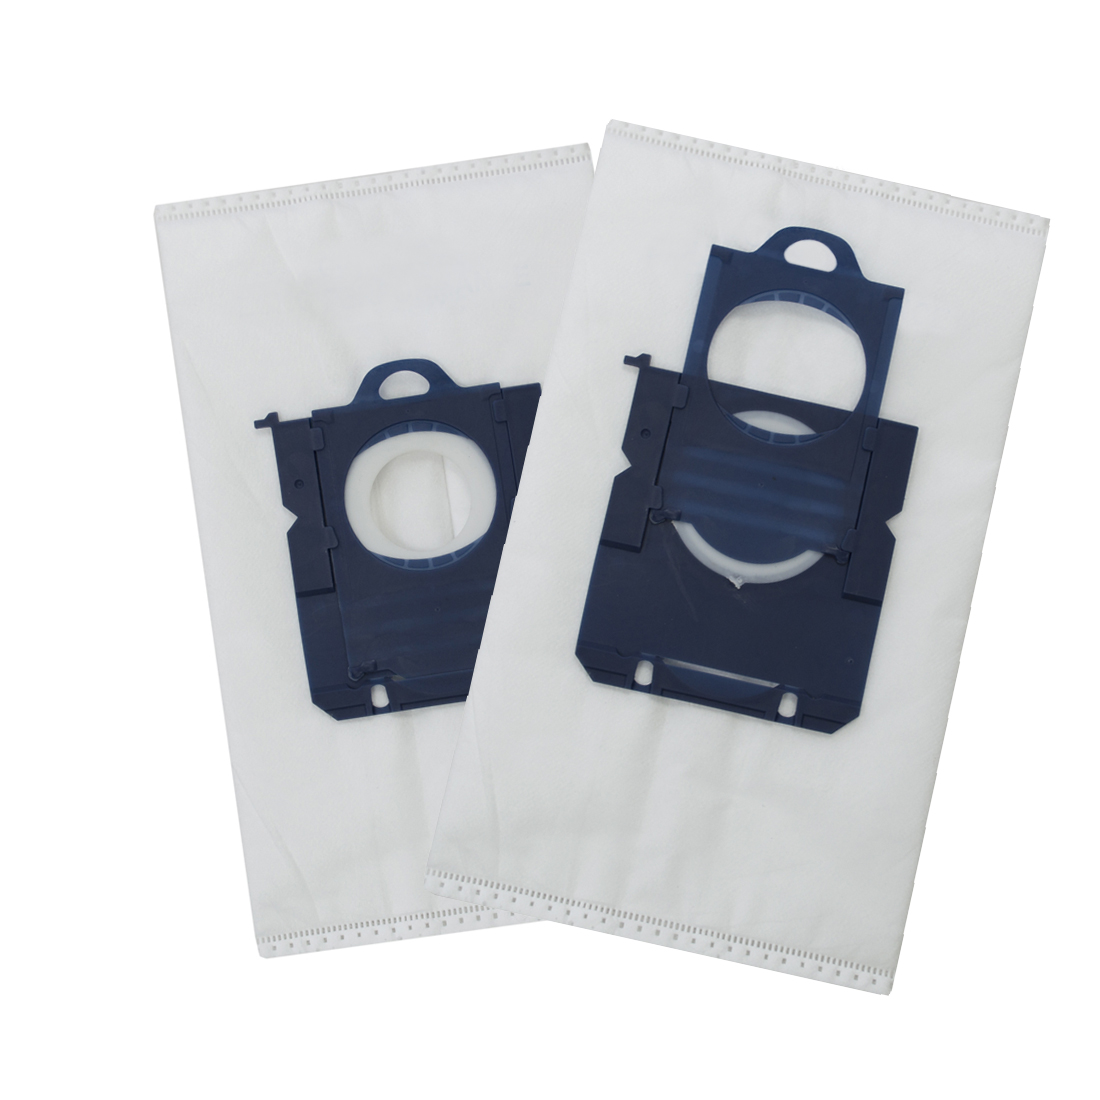 New Plastic Card Vacuum Dust Bag For Electrolux Philips S-BAG S BAG FC9180 FC8720 Vacuum Cleaner Micro Filter Fabric Dust Bags Spare Parts